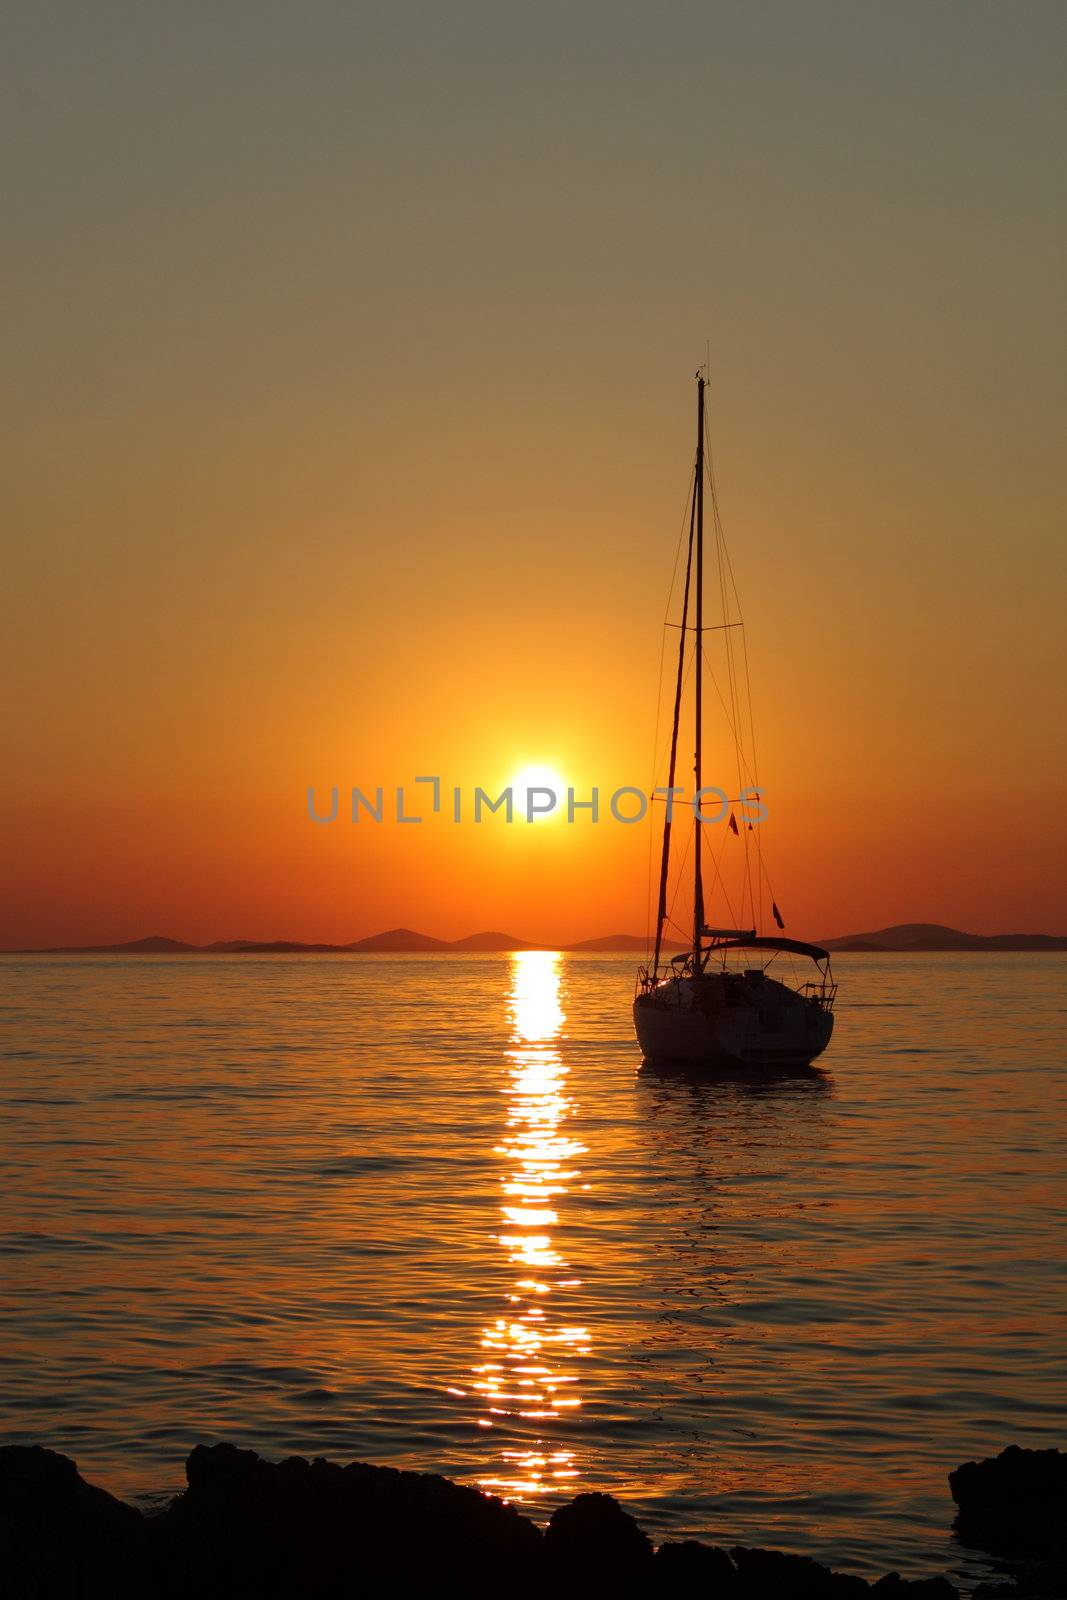 Gold romantic sunset with silhouette of yacht